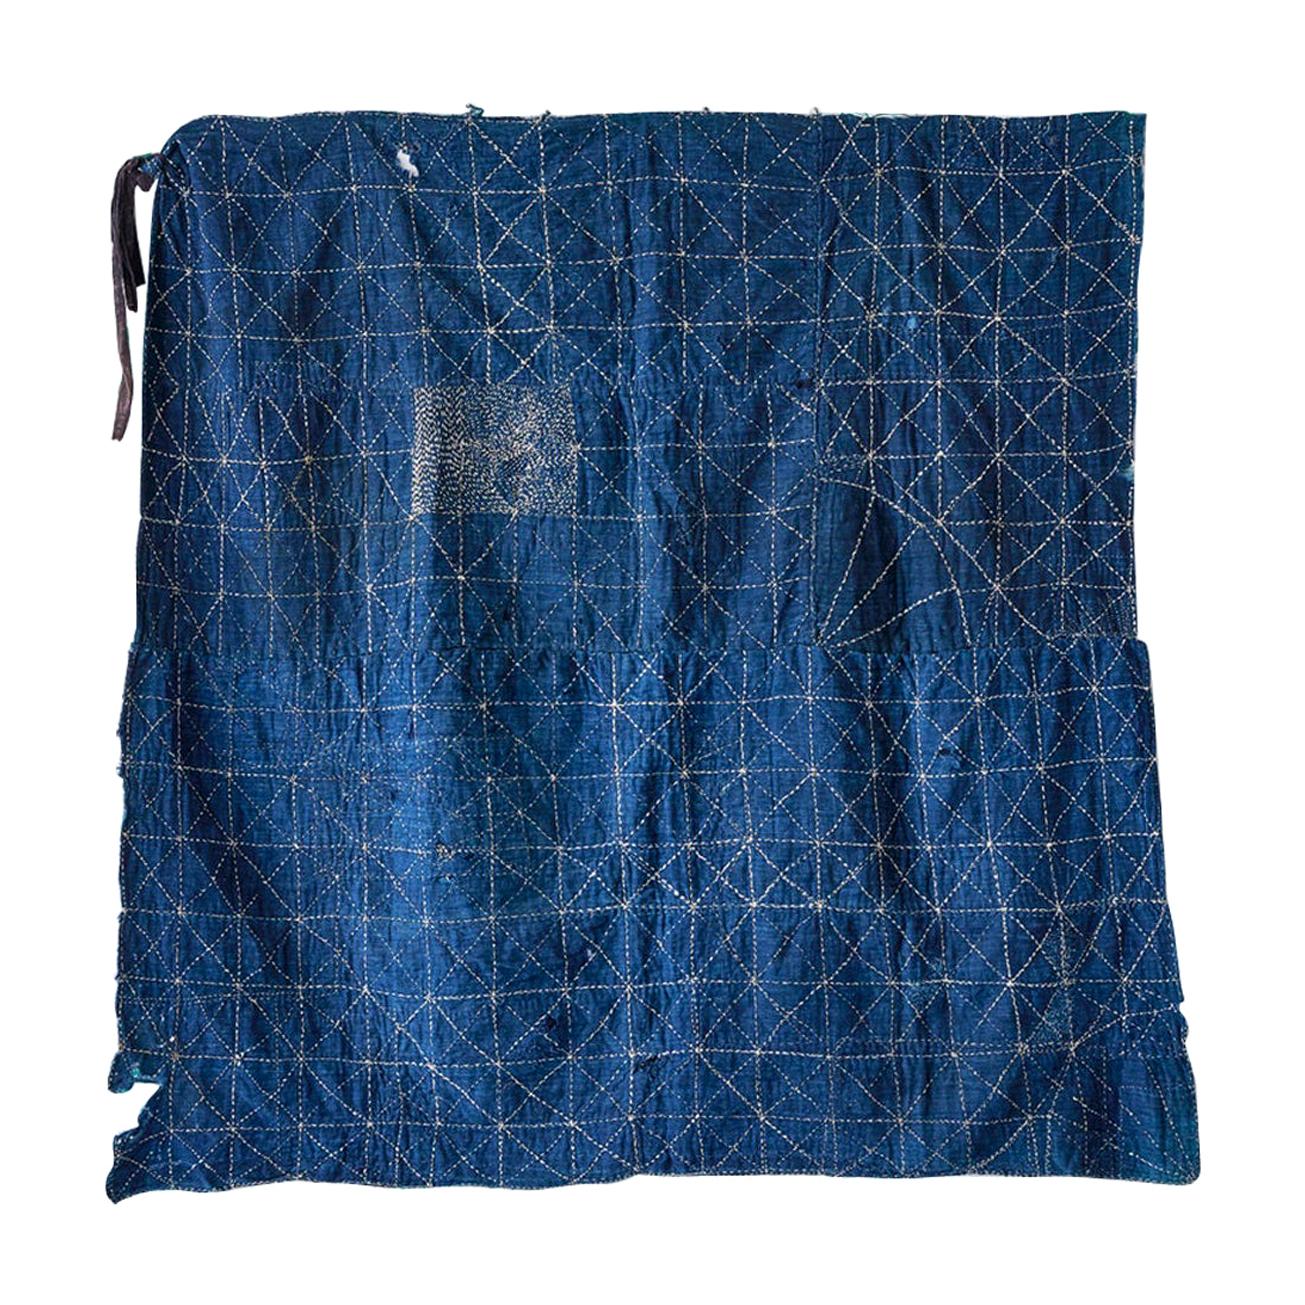 Antique Handcrafted Patched "Boro" Textile in Indigo Dye, Japan, 20th Century